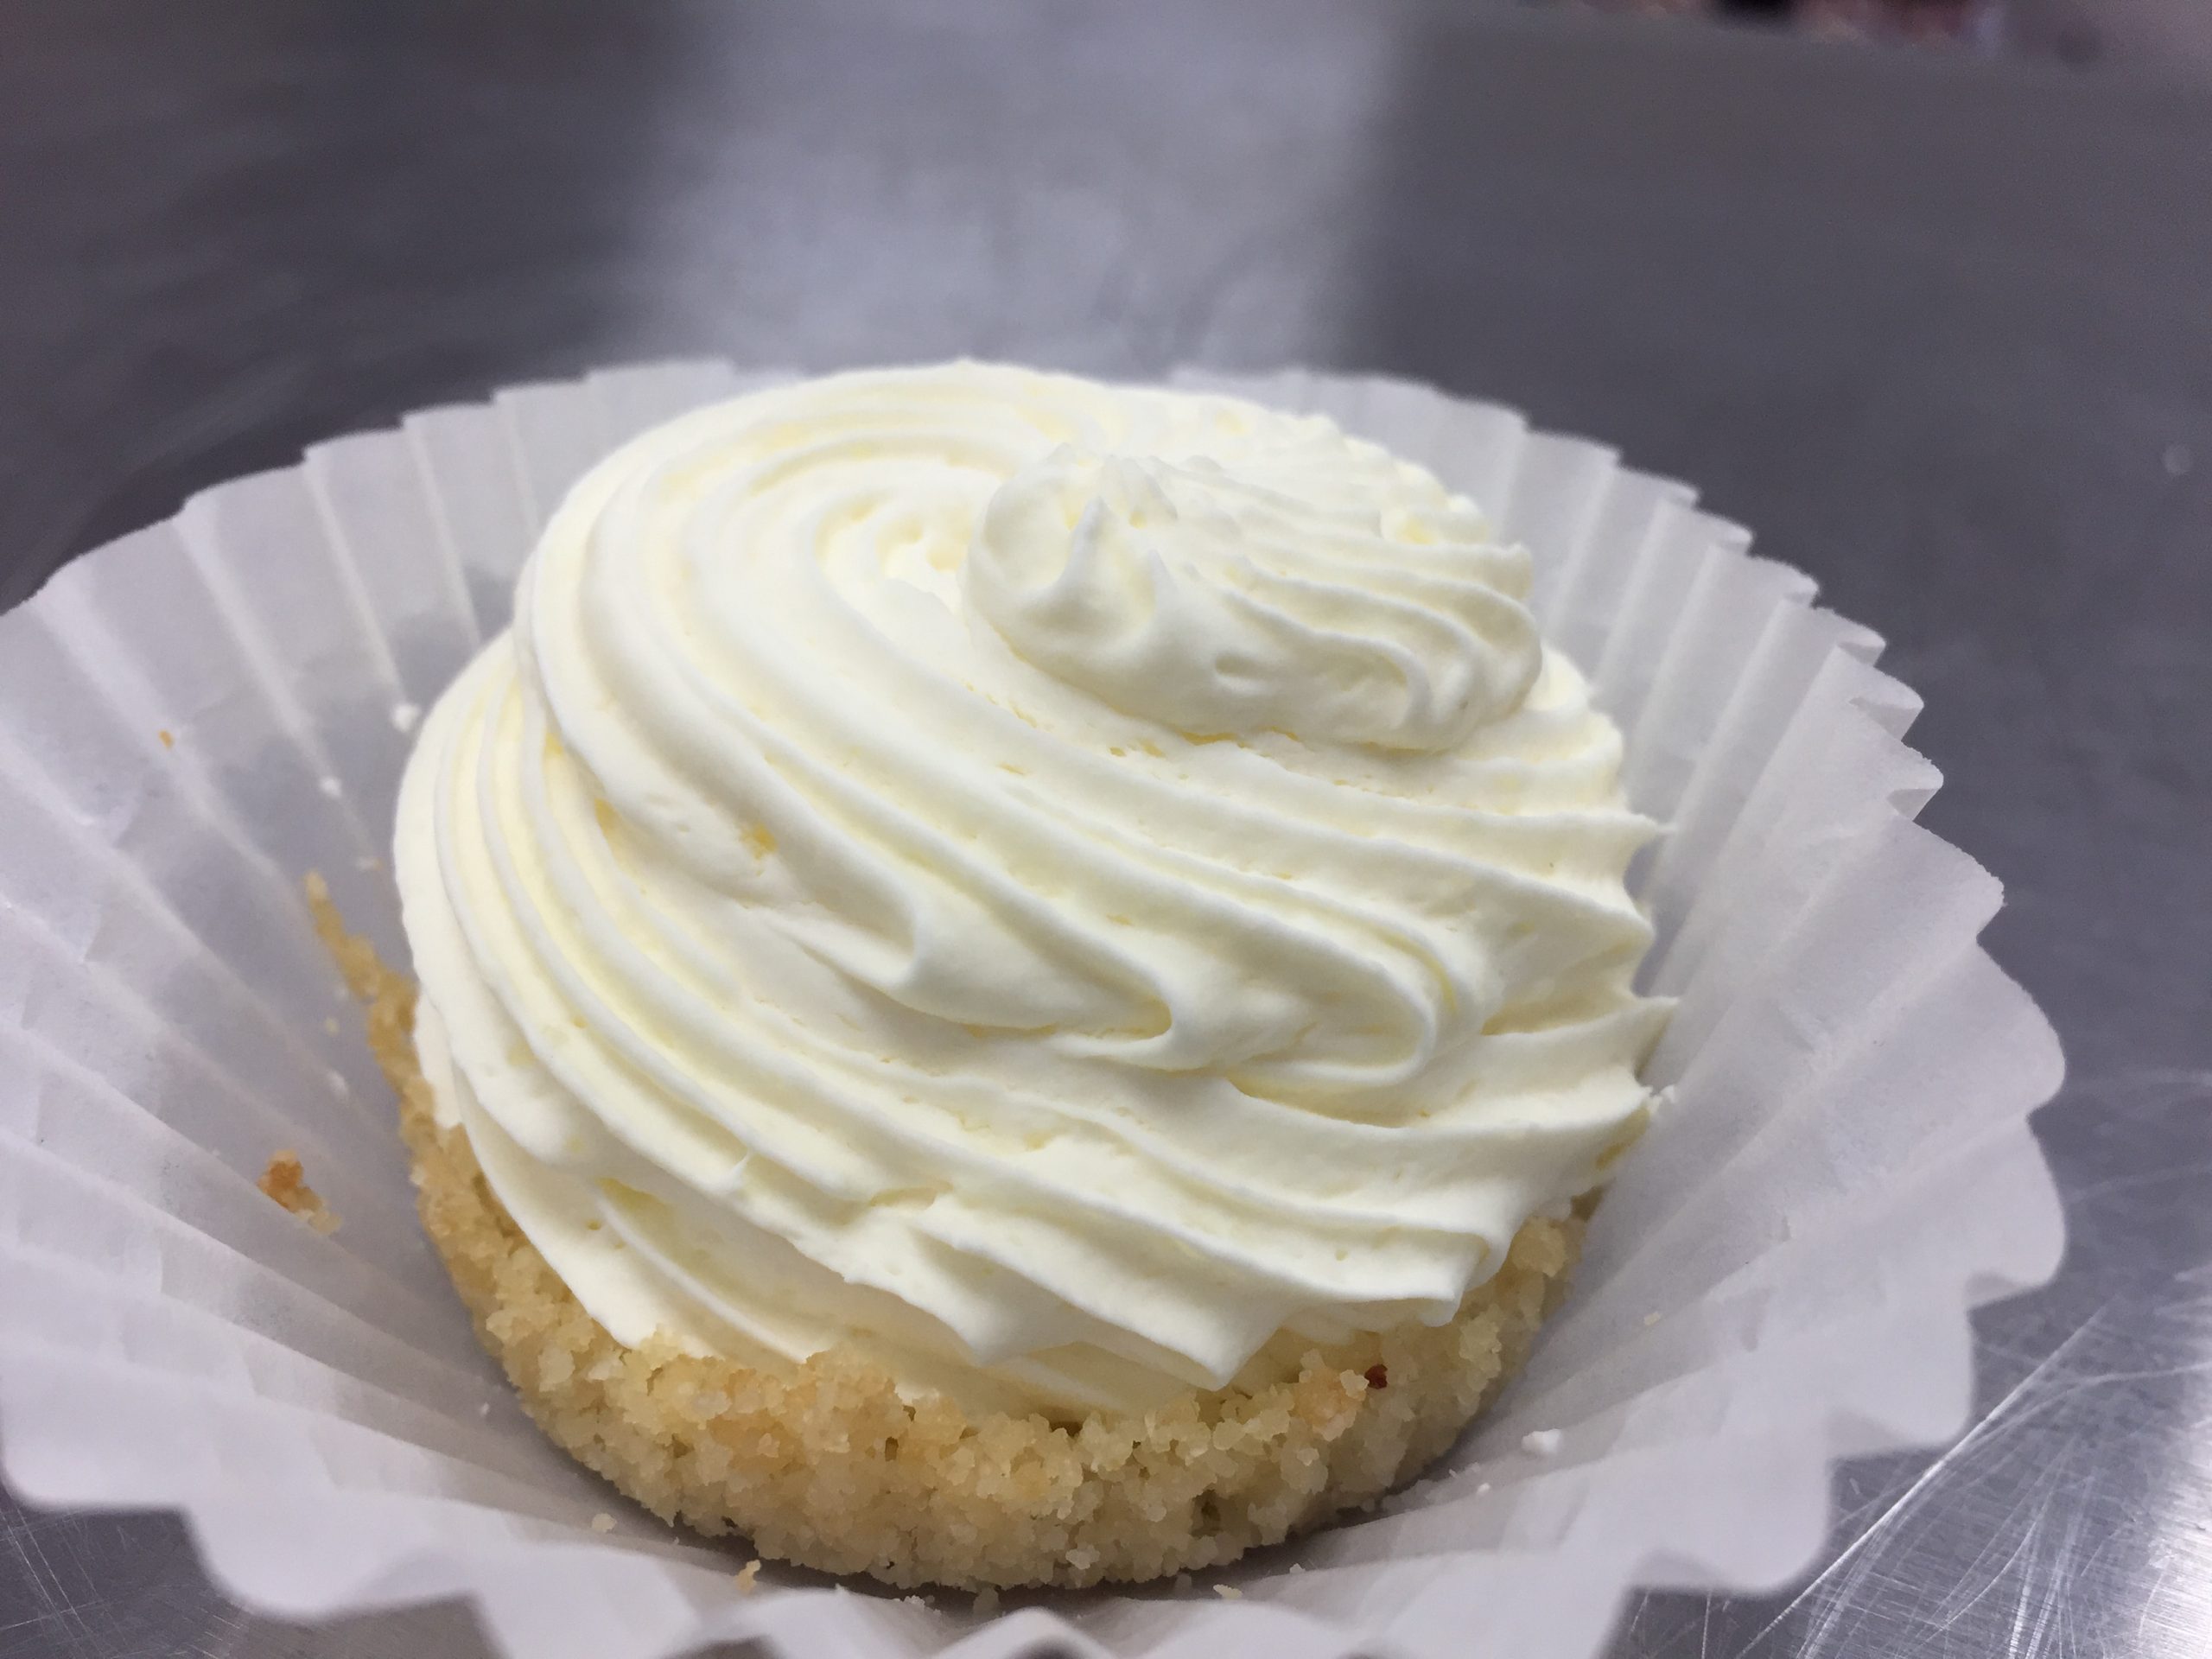 White Chocolate Cream Pie - Dattolo's Baked Goods